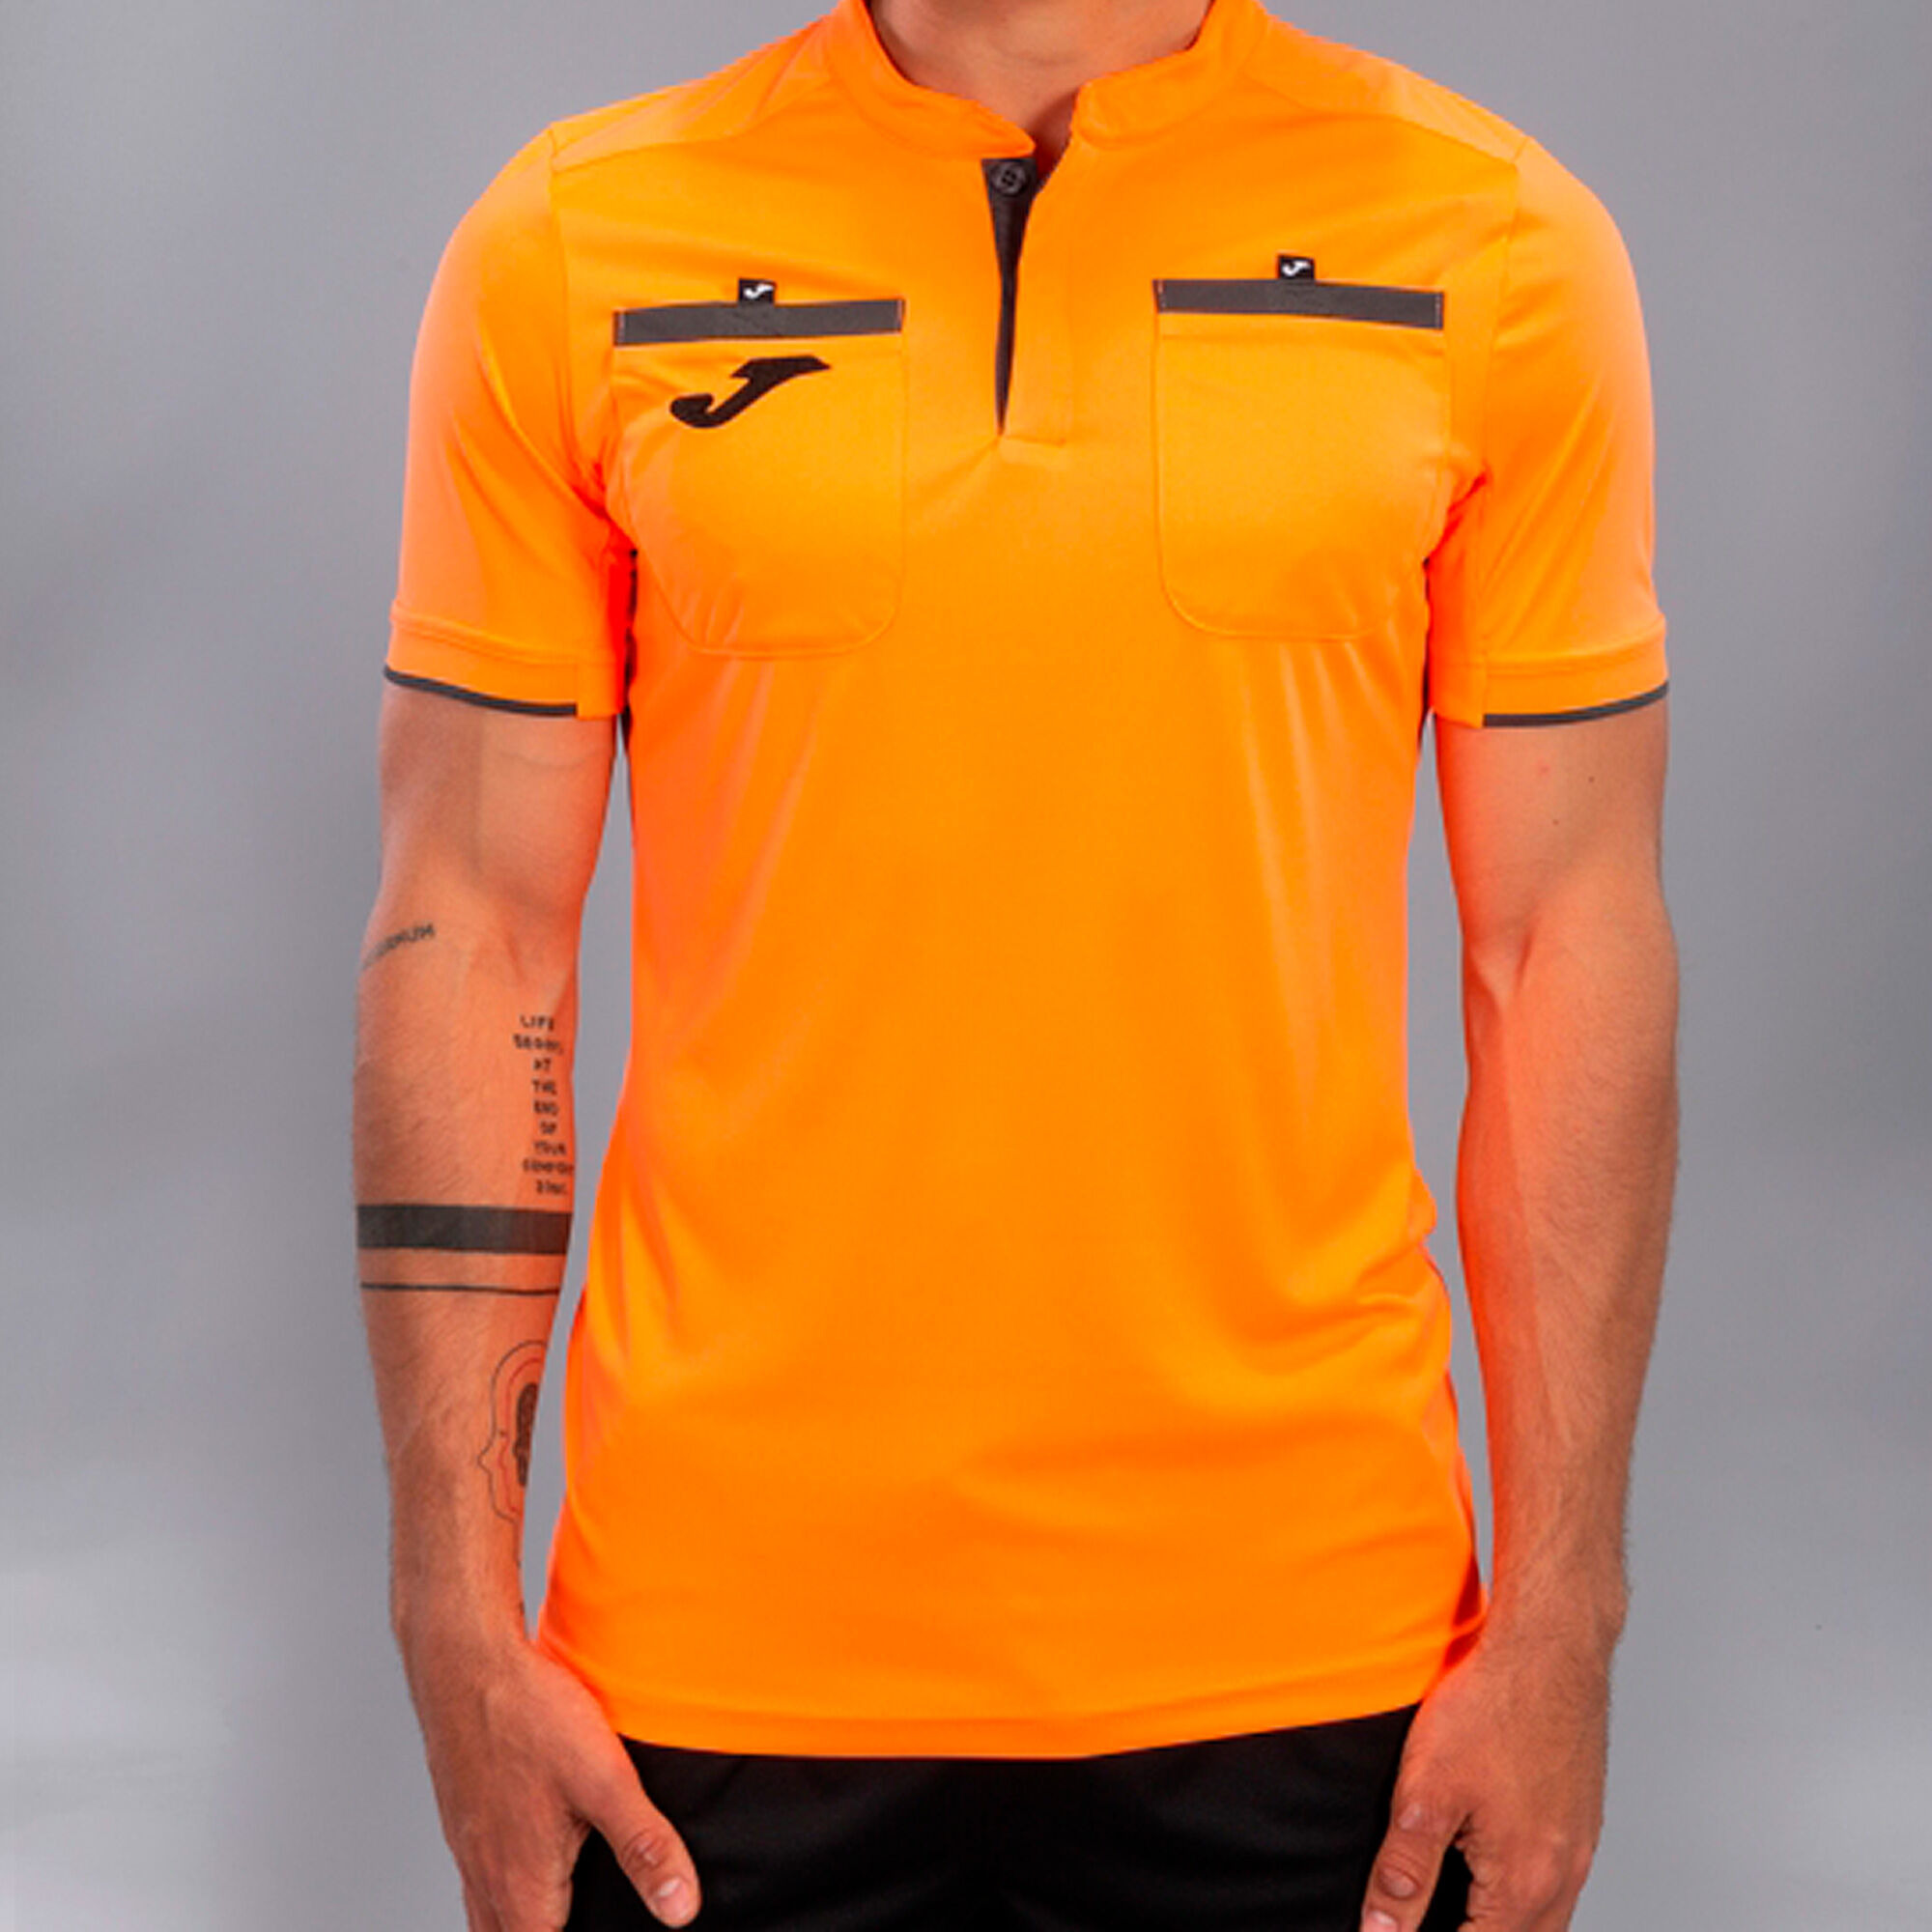 Maillot manches courtes homme Referee orange